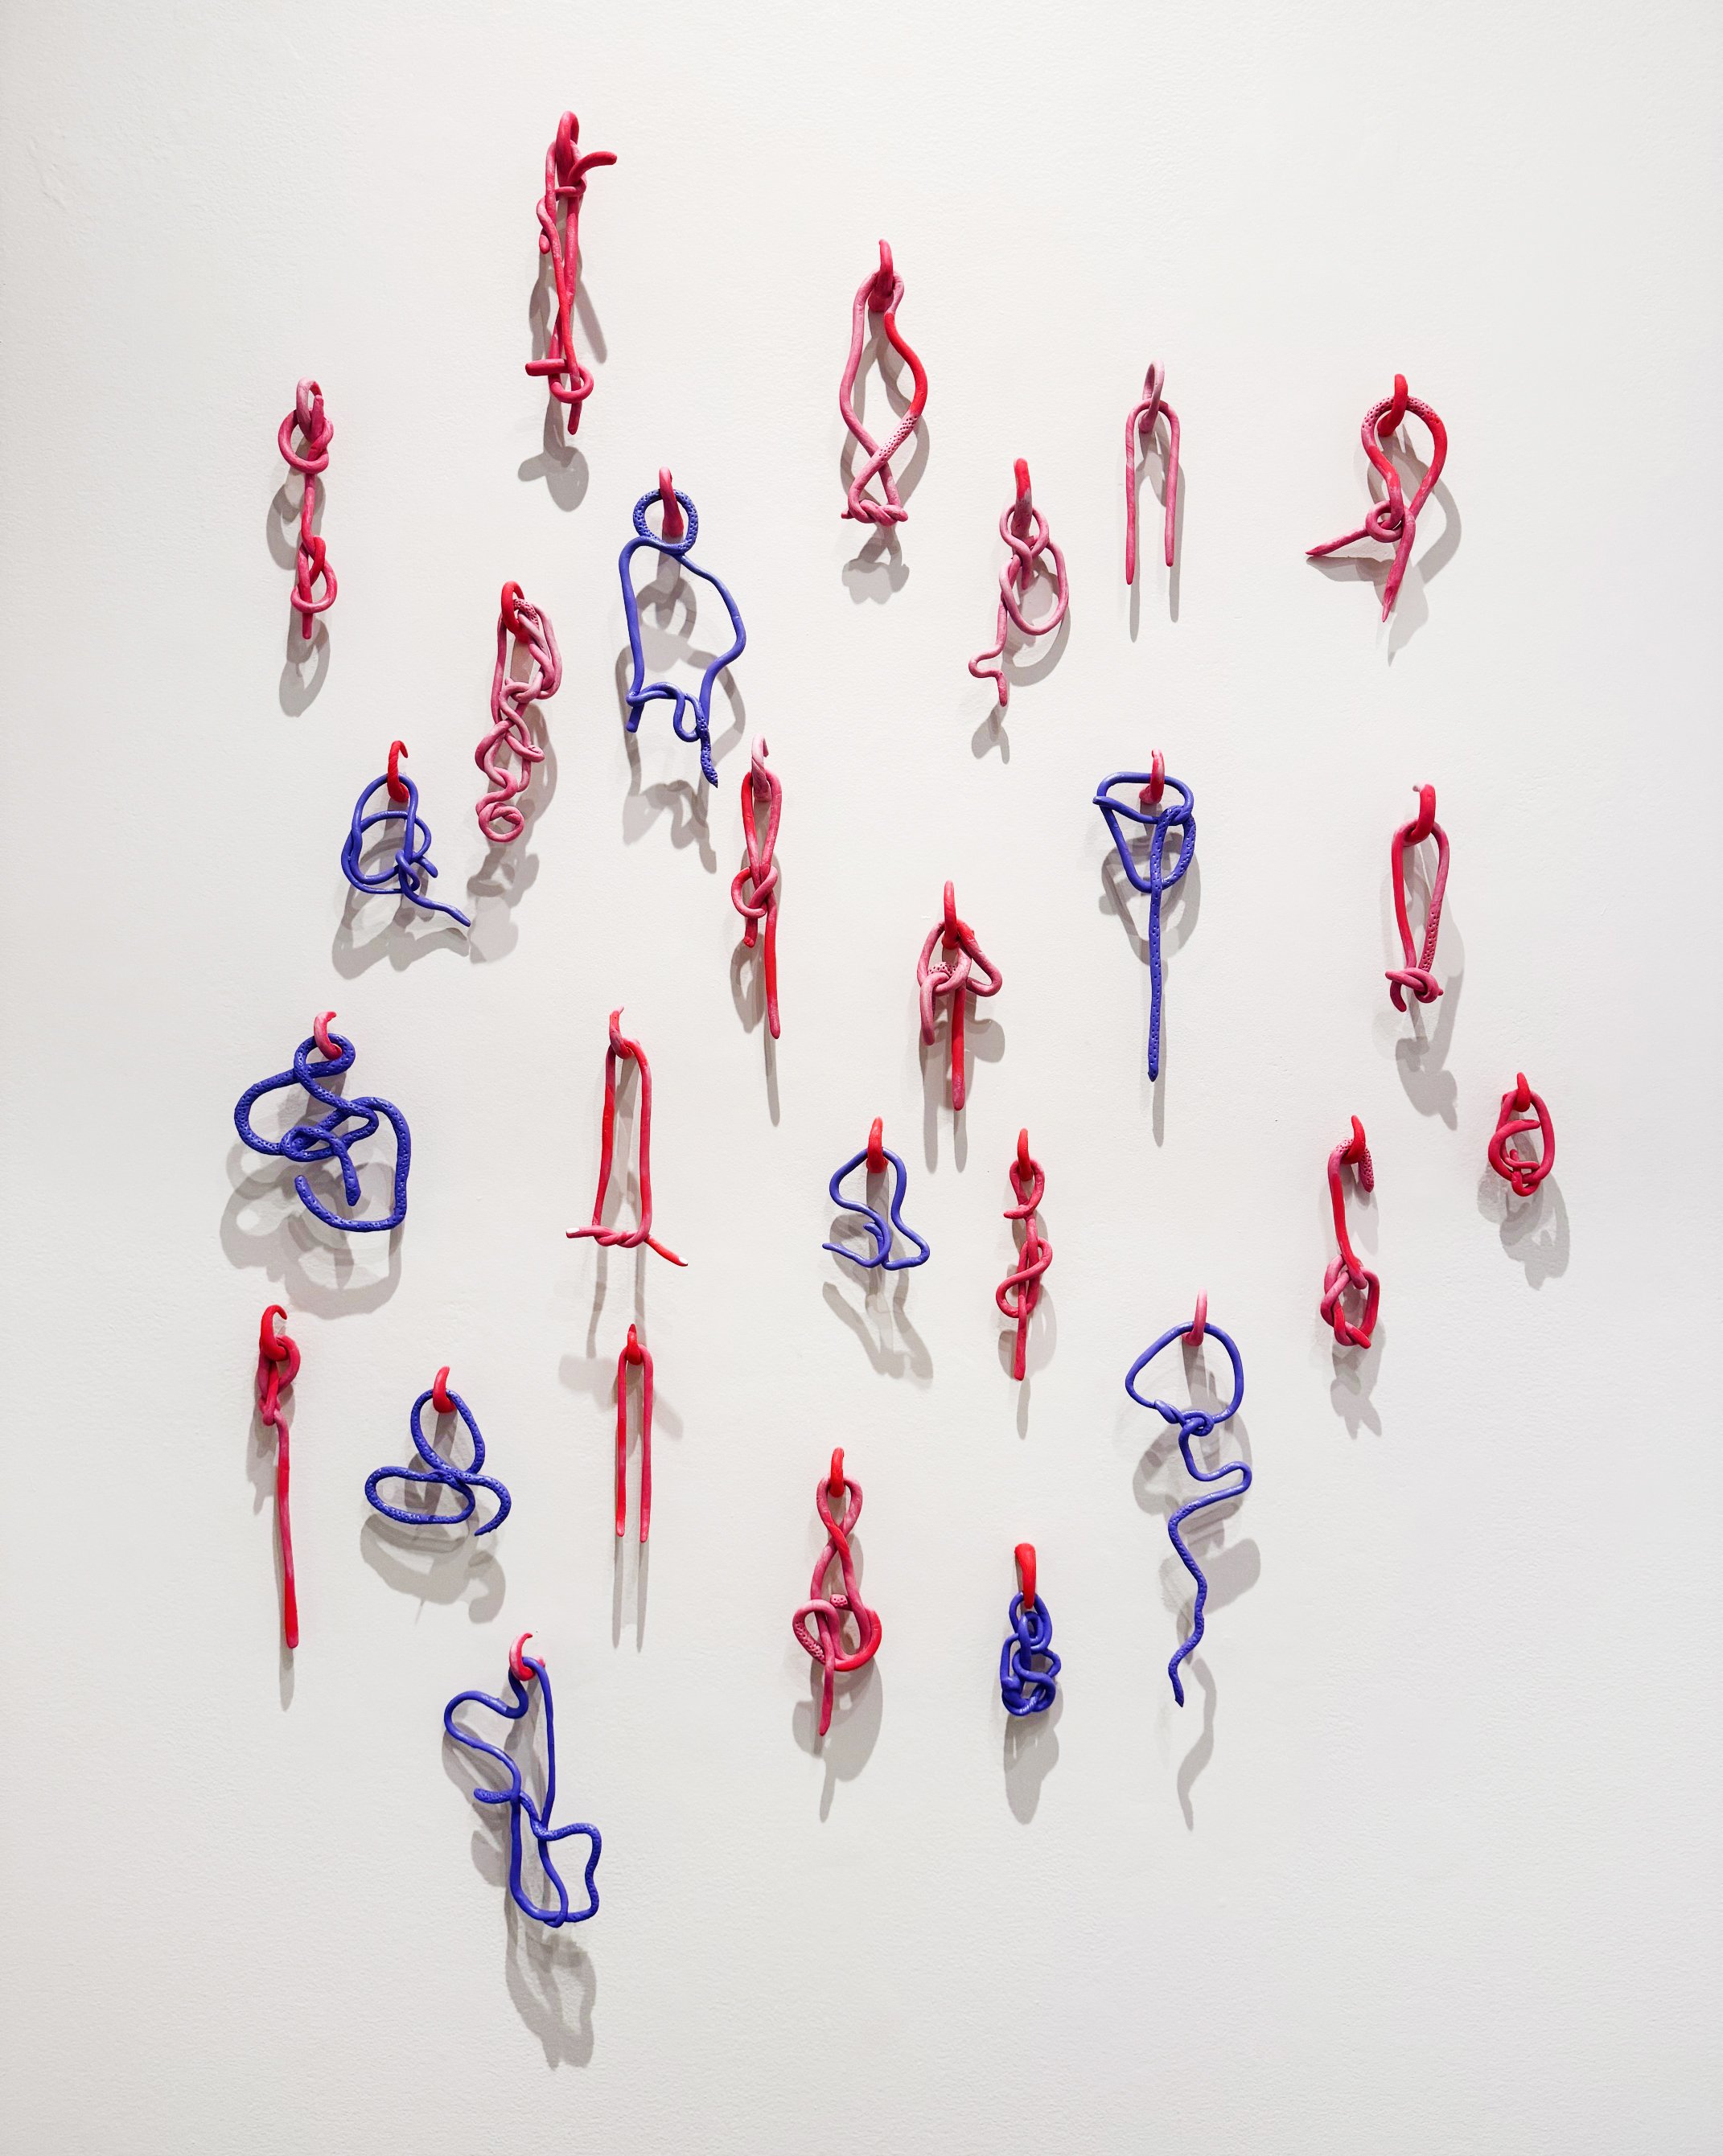 KNOTS, SNAKES, WORMS IN A STATE OF UNDOING | variable sizes, epoxy resin and acrylic paint / installation made of 26 pieces, 2024